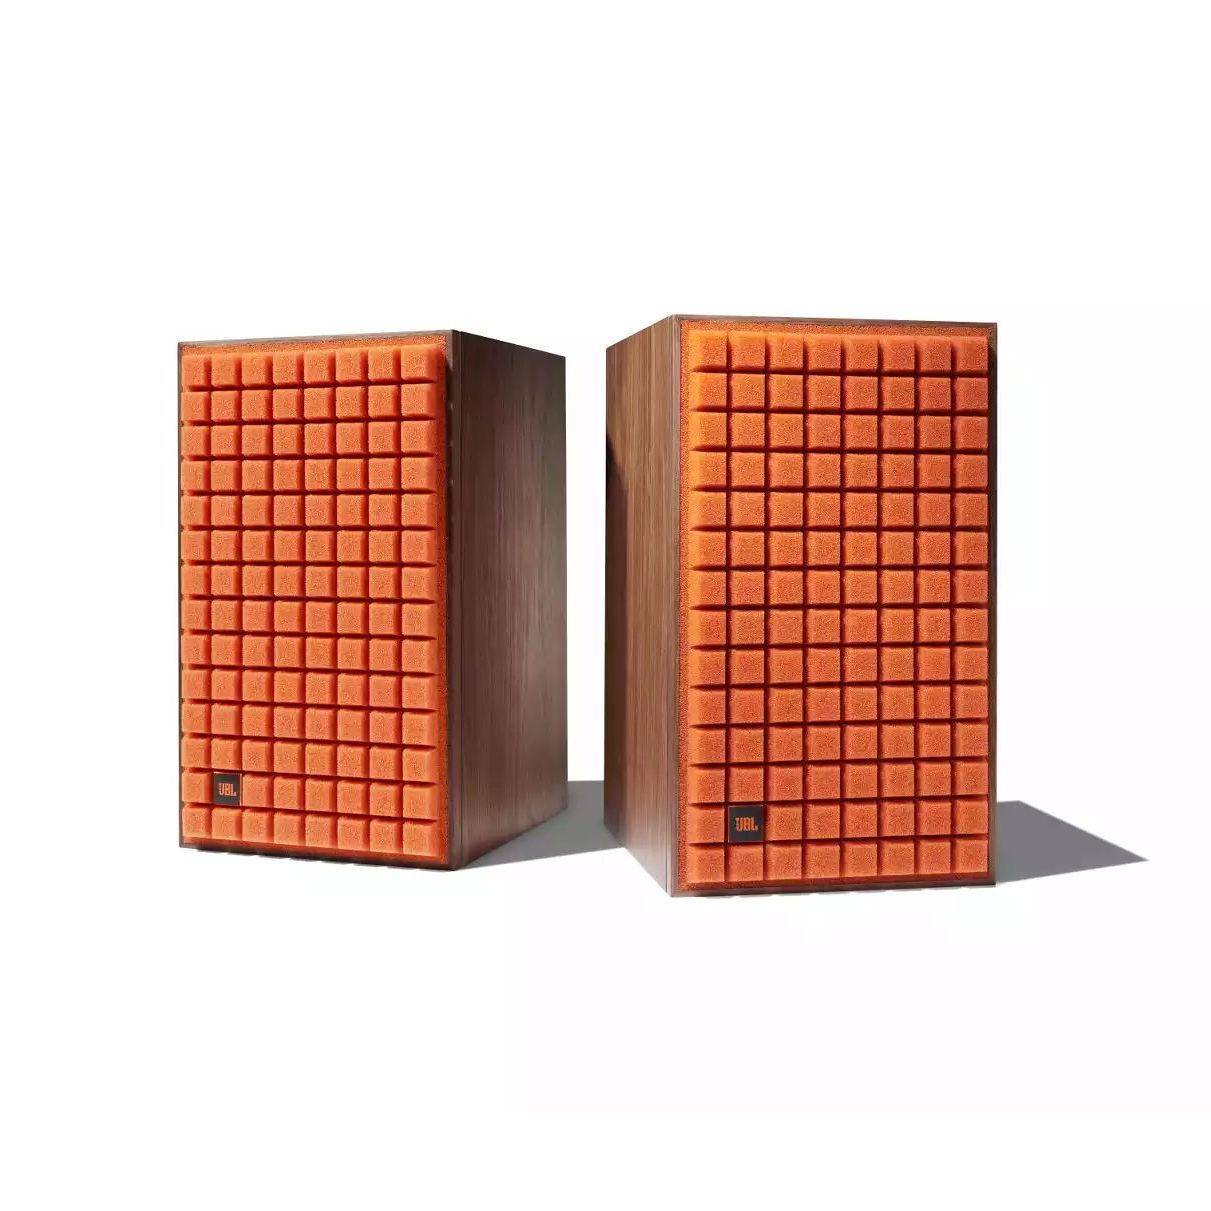 JBL SYNTHESIS L82 CLASSIC